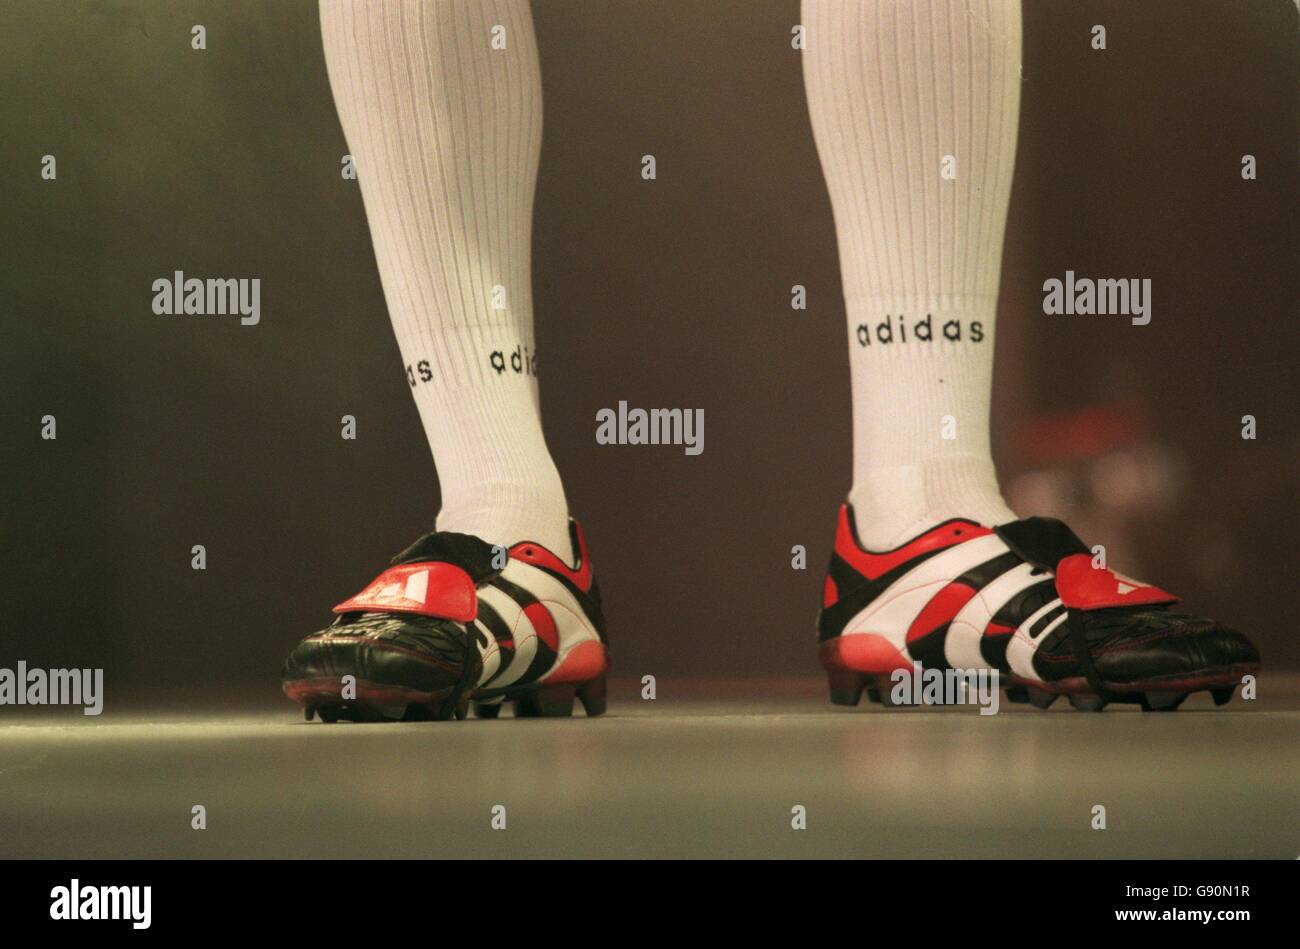 Soccer - David Beckham Signs a Boot Contract With Adidas. David Beckham of Manchester United at the launch of his new Adidas boot deal. Stock Photo